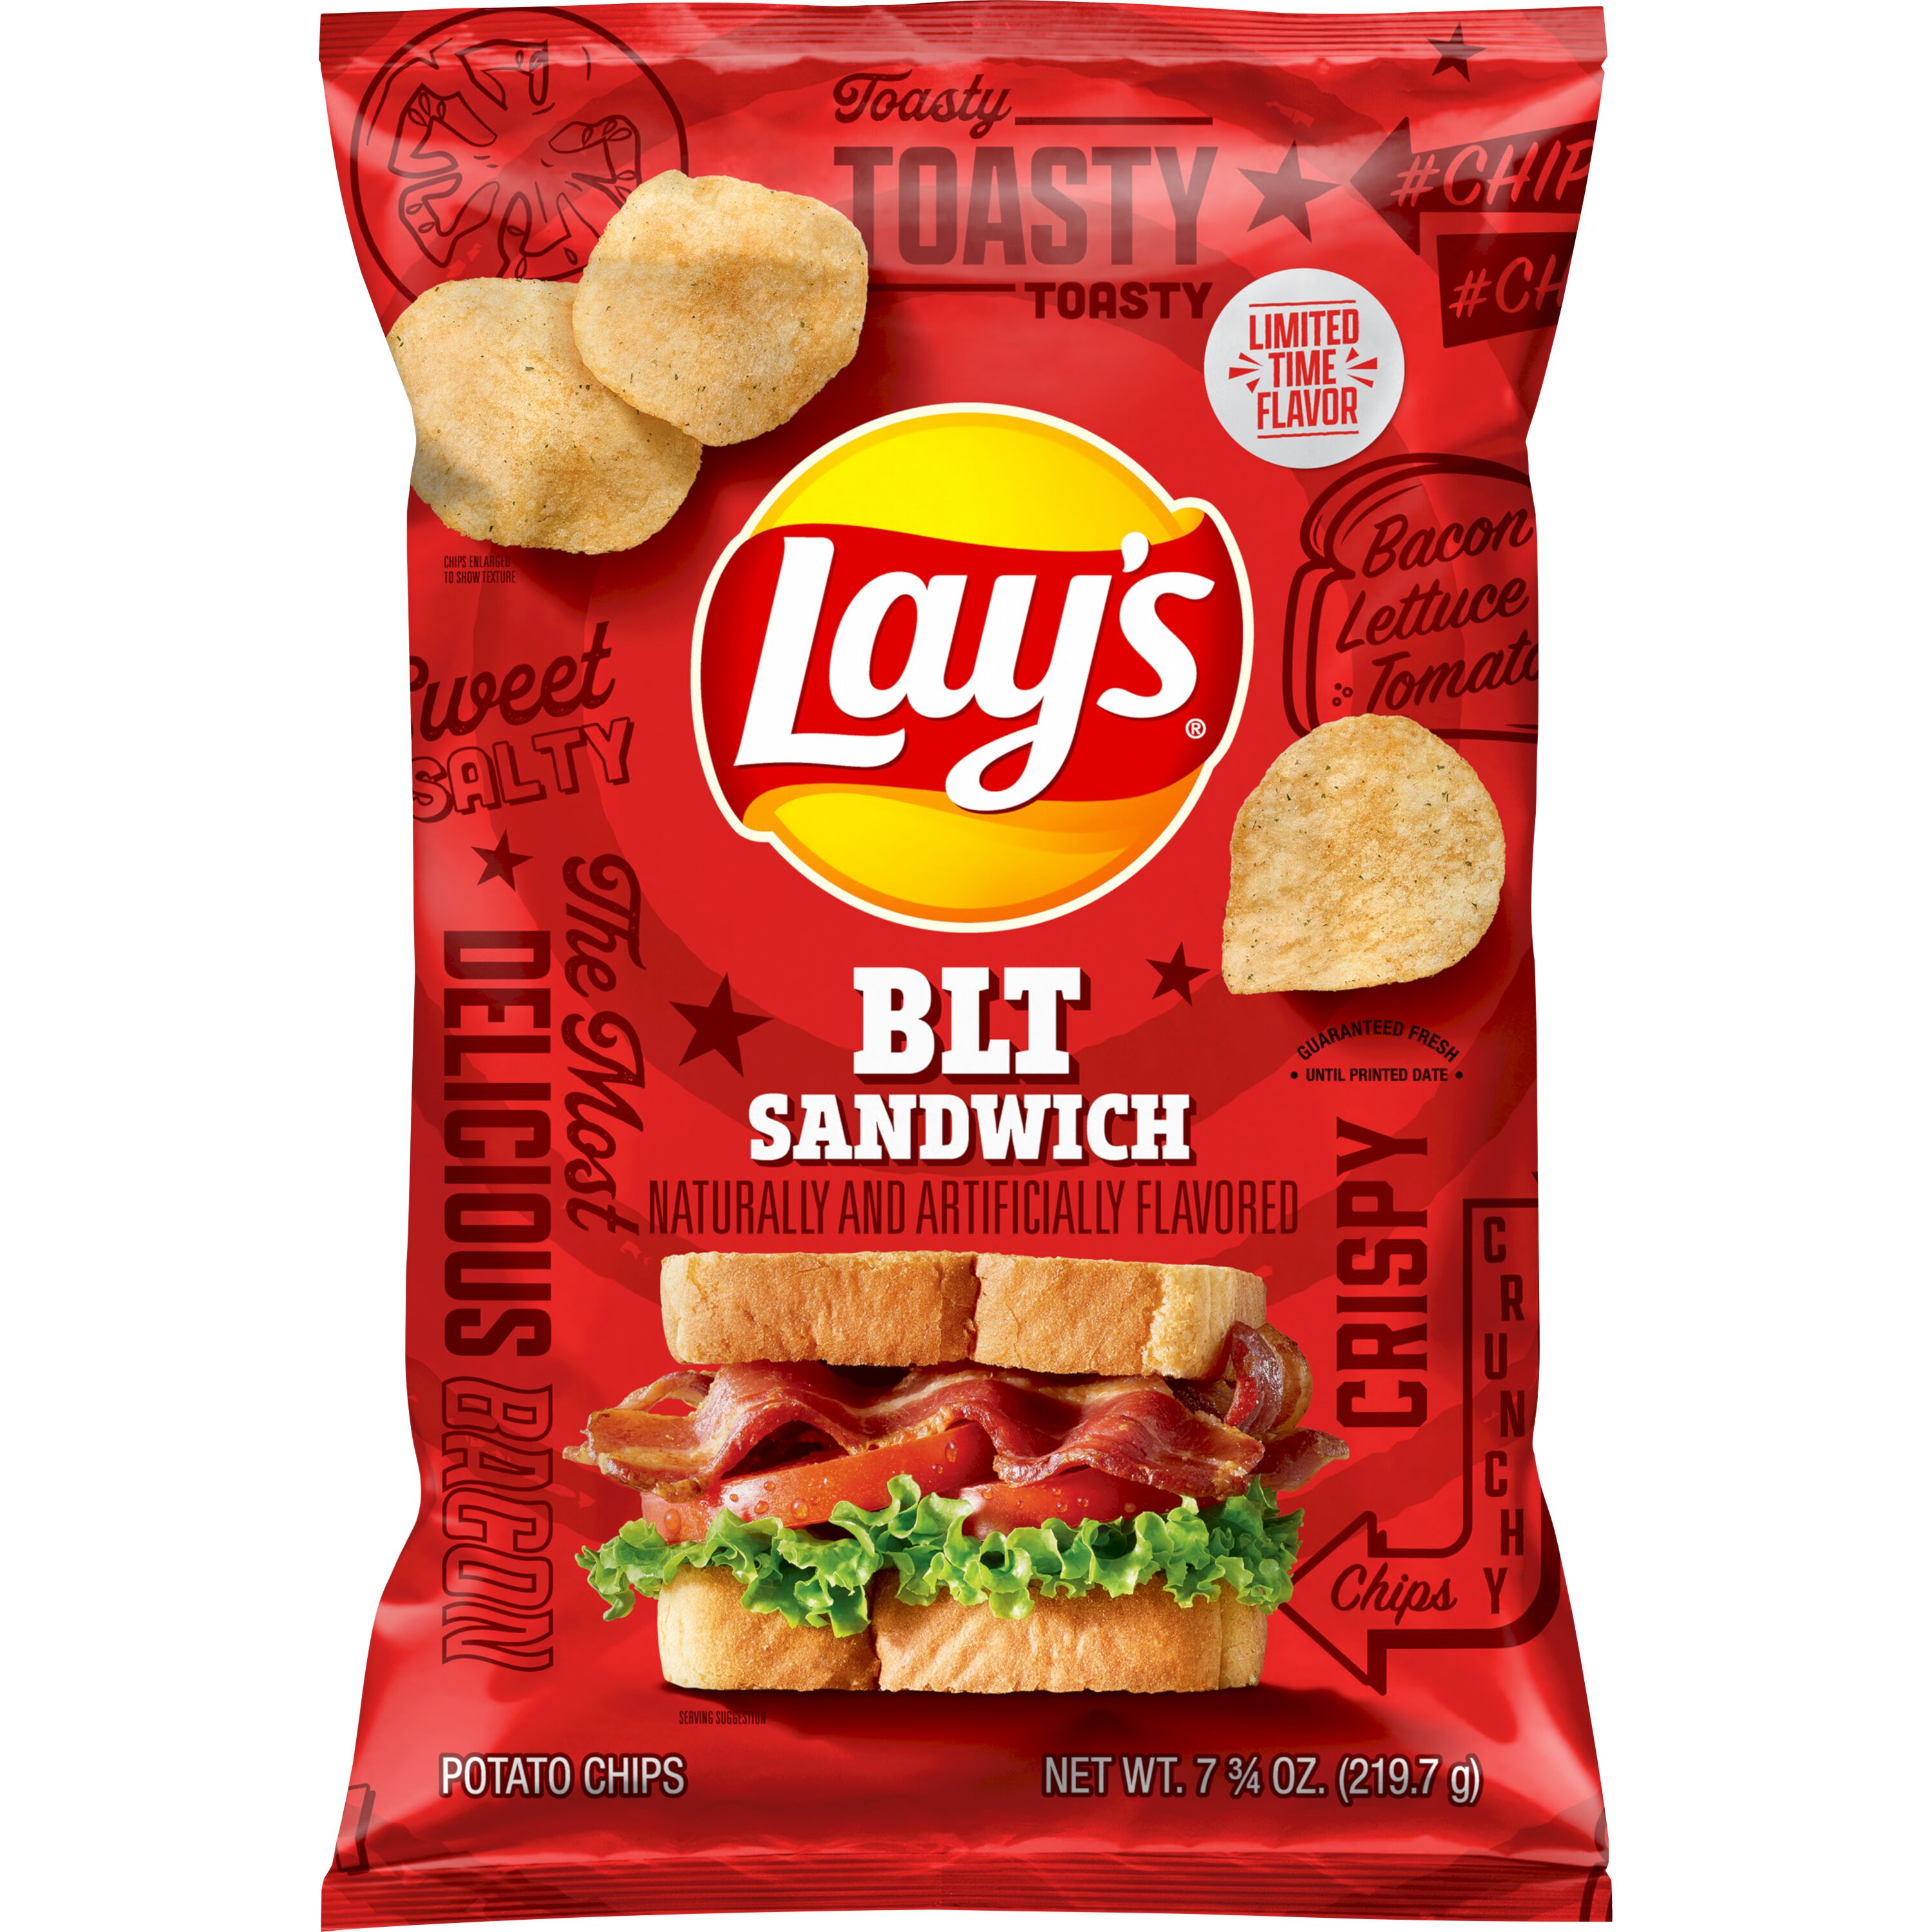 Lay's, BLT Sandwich Naturally And Artificially Flavored, Potato Chips